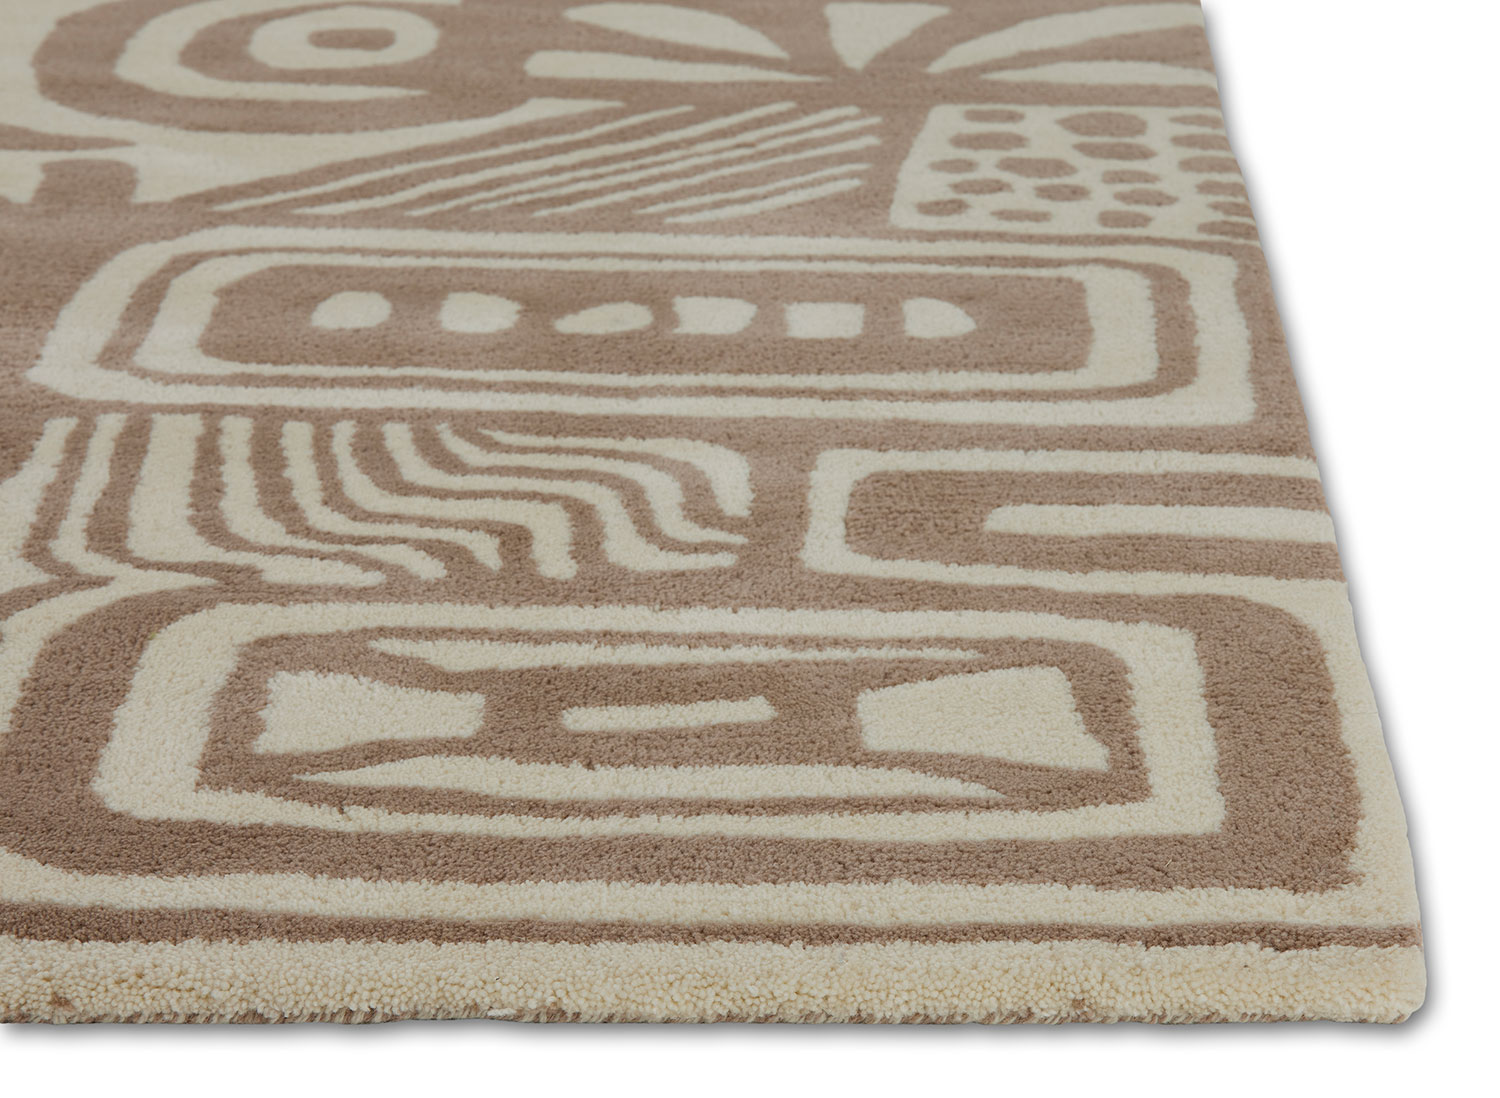 The corner detail of a neutral colored, modern area rug called Storybook by Angela Adams